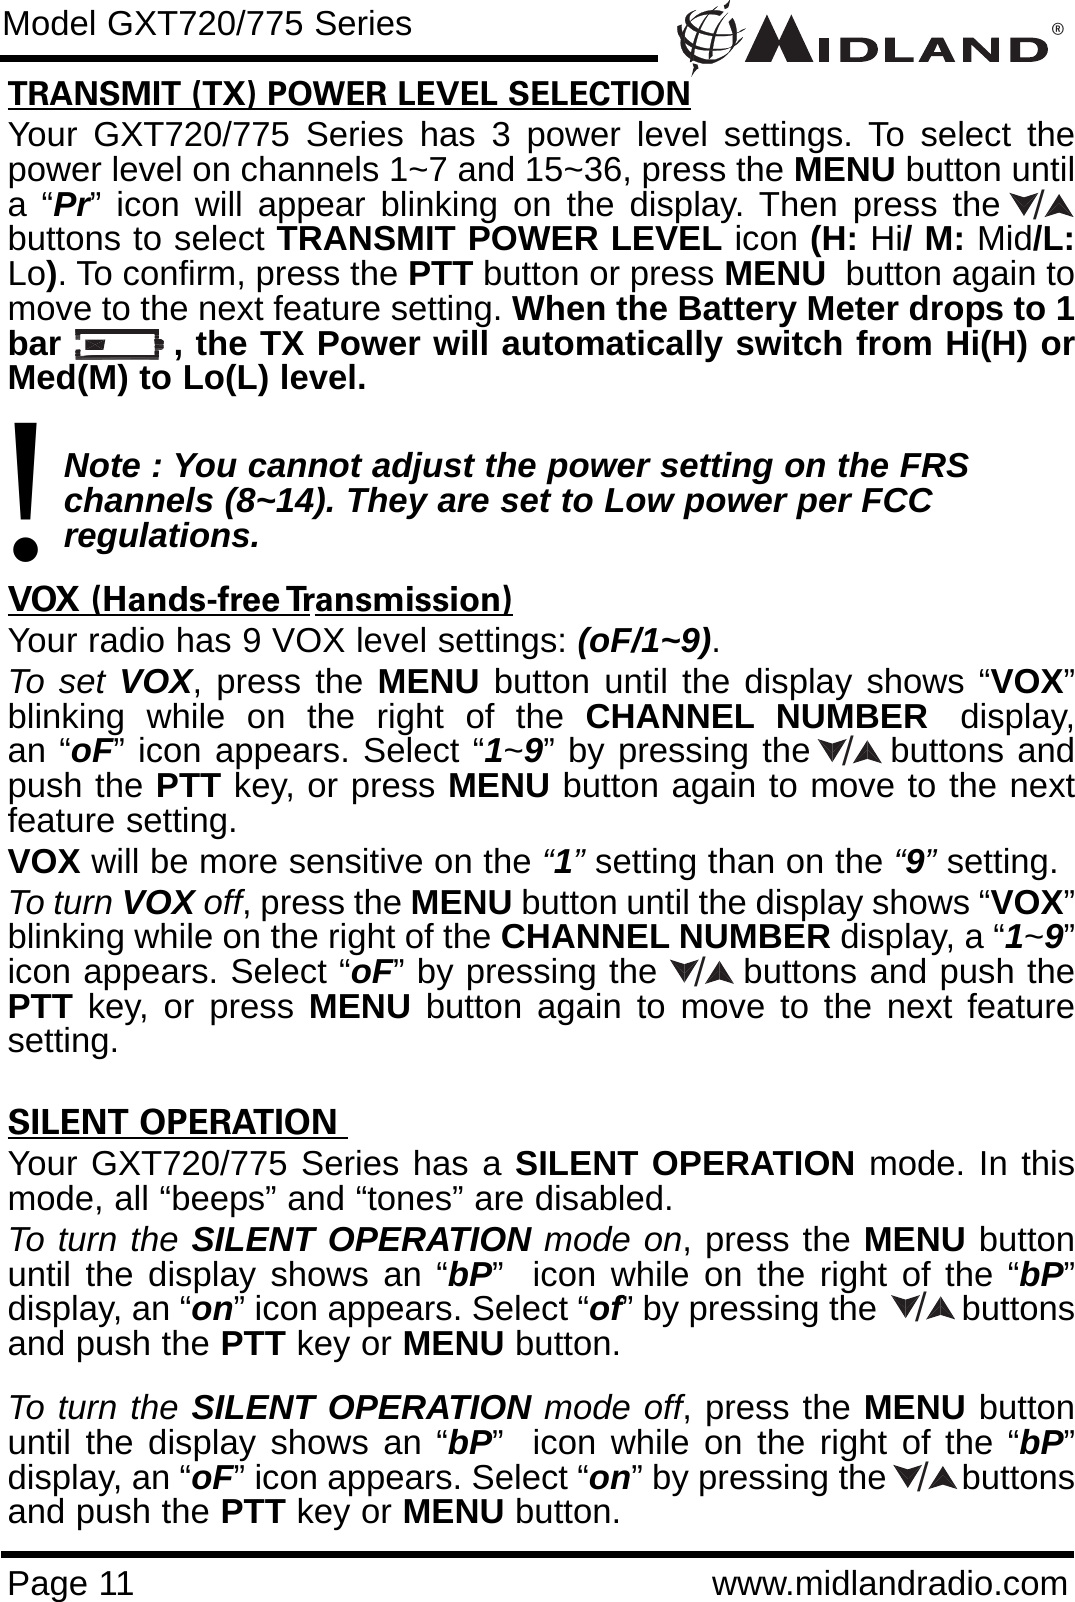 ®Page 11 www.midlandradio.comTRANSMIT (TX) POWER LEVEL SELECTIONYour GXT720/775 Series has 3 power level settings. To select thepower level on channels 1~7 and 15~36, press the MENU button untila “Pr” icon will appear blinking on the display. Then press thebuttons to select TRANSMIT POWER LEVEL icon (H: Hi/ M: Mid/L:Lo). To confirm, press the PTT button or press MENU button again tomove to the next feature setting. When the Battery Meter drops to 1bar         , the TX Power will automatically switch from Hi(H) orMed(M) to Lo(L) level.Note : You cannot adjust the power setting on the FRS   channels (8~14). They are set to Low power per FCC          regulations.VOX (Hands-free Transmission)Your radio has 9 VOX level settings: (oF/1~9).To set VOX, press the MENU button until the display shows “VOX”blinking  while  on  the  right  of  the  CHANNEL NUMBER display,an “oF” icon appears. Select “1~9” by pressing the      buttons andpush the PTT key, or press MENU button again to move to the nextfeature setting.  VOX will be more sensitive on the “1”setting than on the “9”setting.To turn VOX off, press the MENU button until the display shows “VOX”blinking while on the right of the CHANNEL NUMBER display, a “1~9”icon appears. Select “oF” by pressing the       buttons and push thePTT key, or press MENU button again to move to the next featuresetting.SILENT OPERATION Your GXT720/775 Series has a SILENT OPERATION mode. In thismode, all “beeps” and “tones” are disabled. To turn the SILENT OPERATION mode on, press the MENU buttonuntil the display shows an “bP”  icon while on the right of the “bP”display, an “on” icon appears. Select “of” by pressing the         buttonsand push the PTT key or MENU button. To turn the SILENT OPERATION mode off, press the MENU buttonuntil the display shows an “bP”  icon while on the right of the “bP”display, an “oF” icon appears. Select “on” by pressing the        buttonsand push the PTT key or MENU button.Model GXT720/775 Series!/////